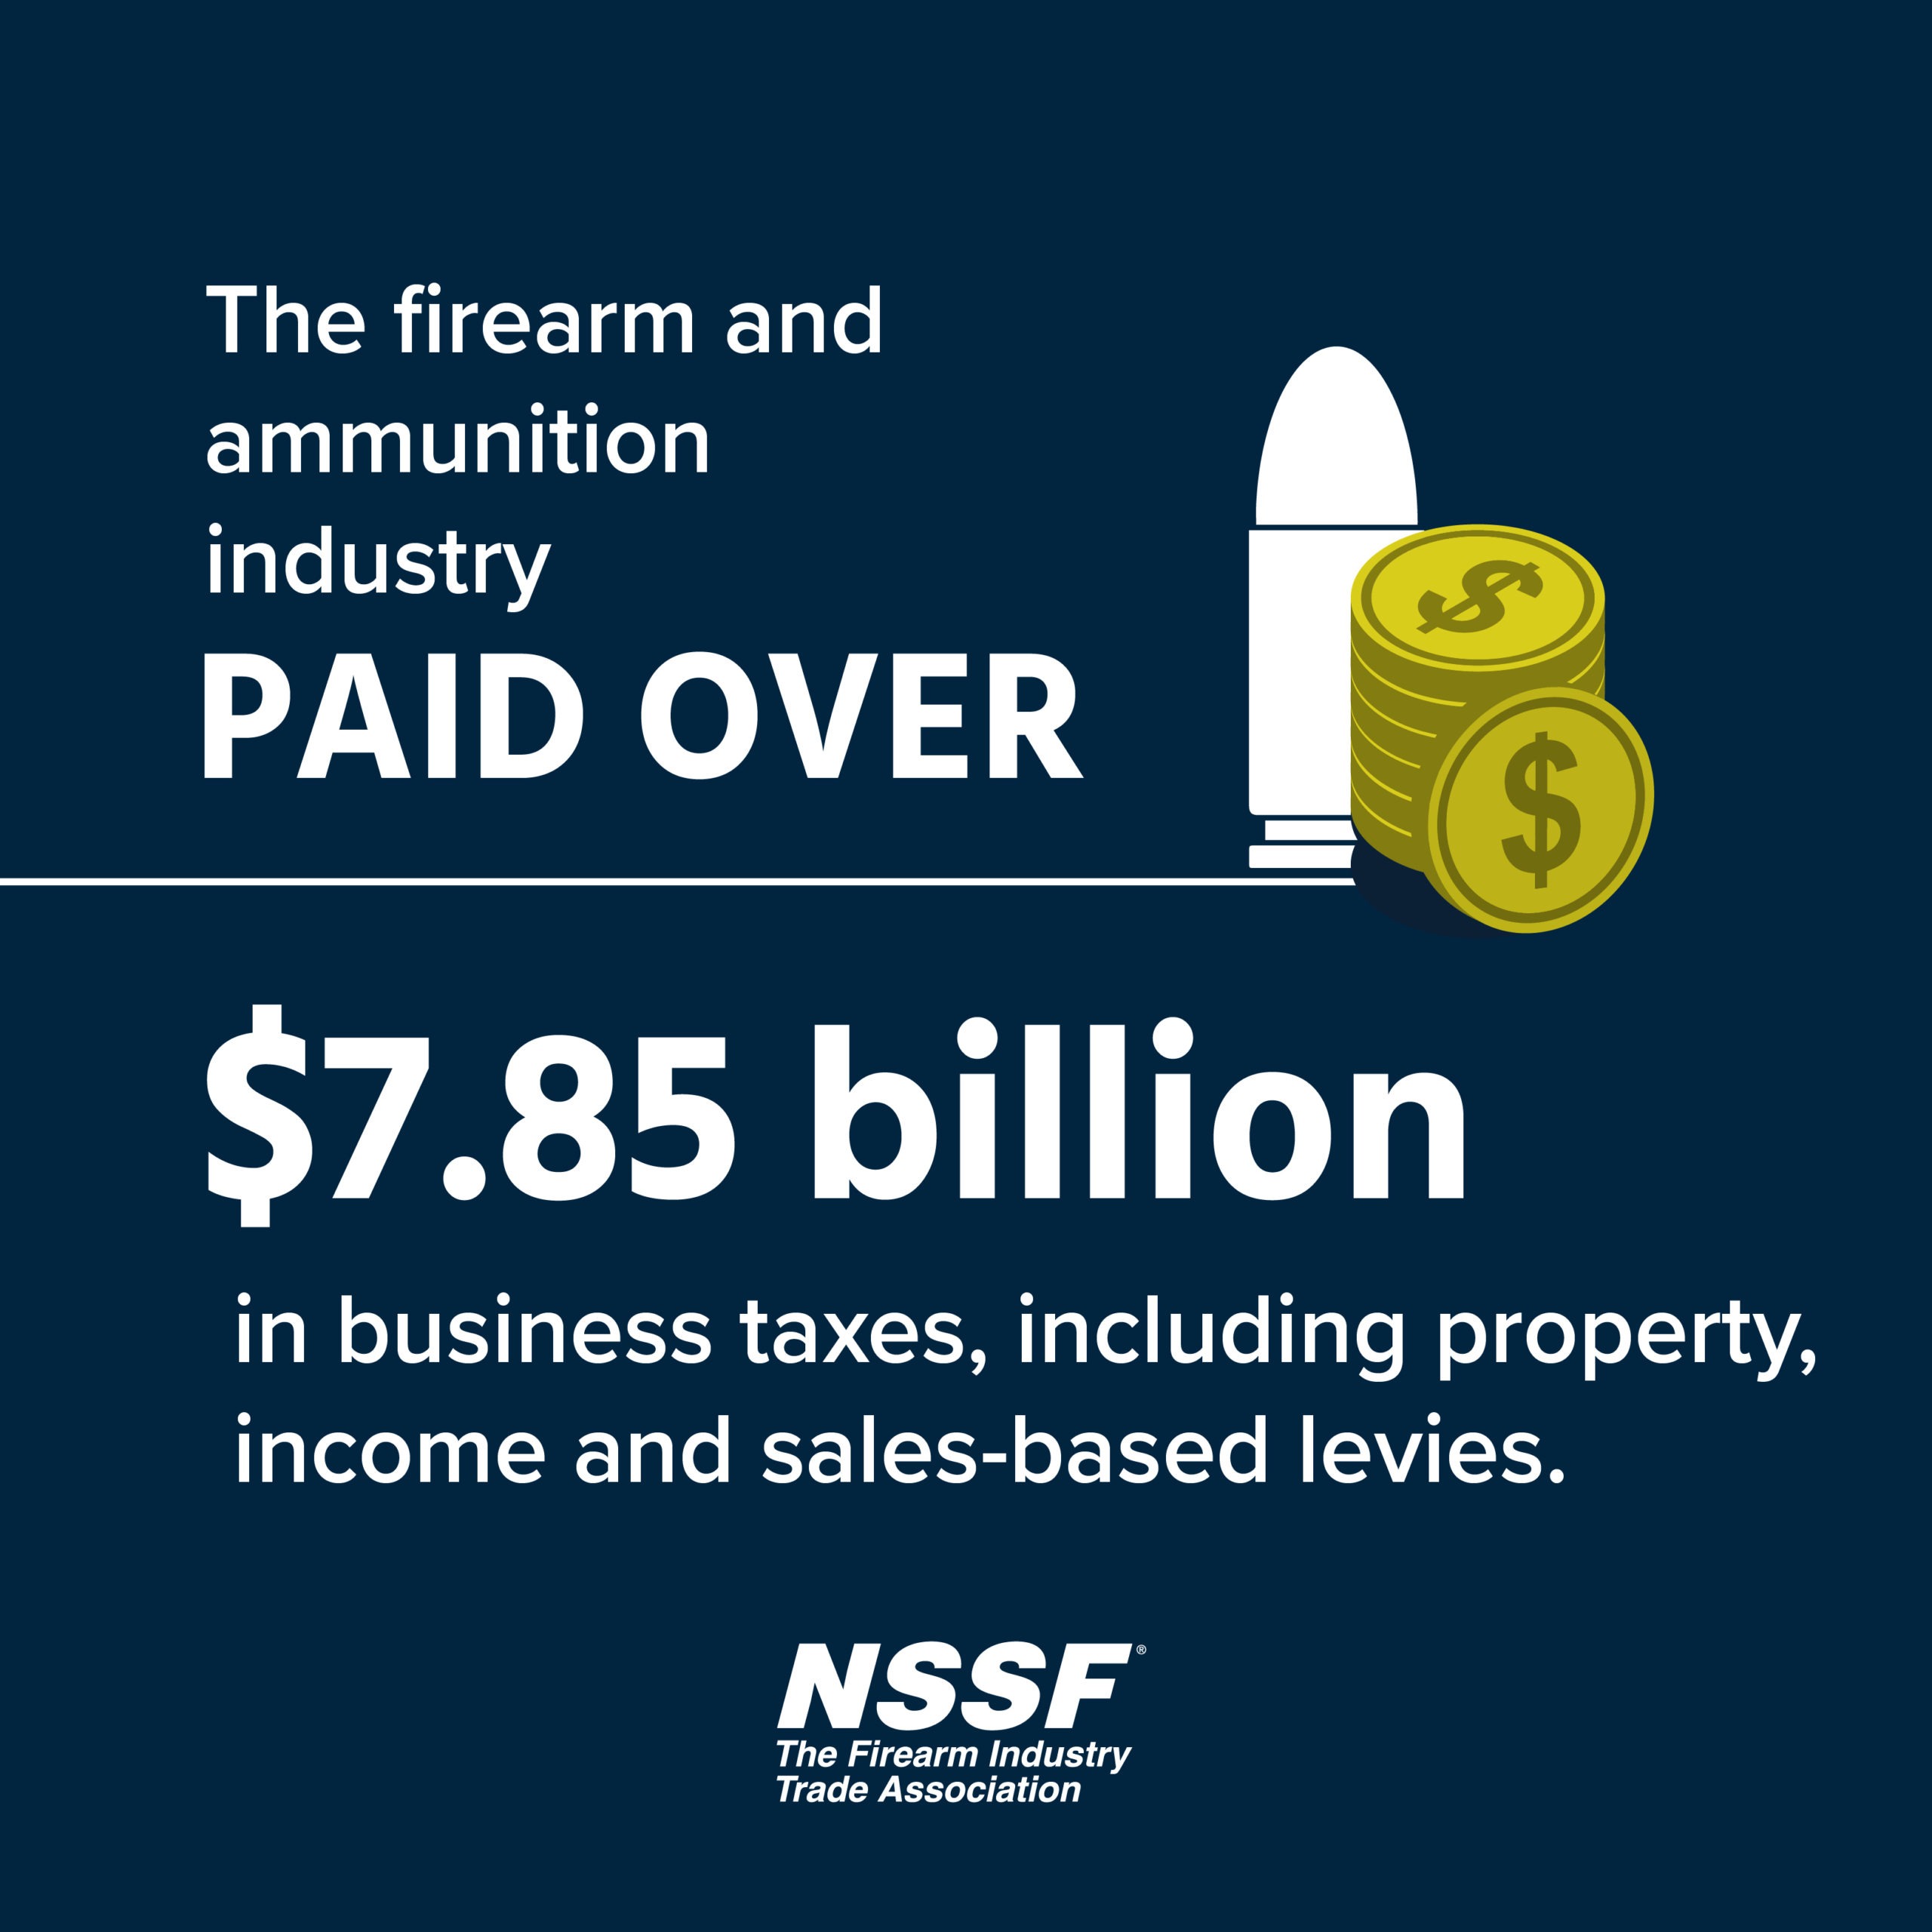 NSSF+released+the+2022+Economic+Impact+Report+showing+the+U.S.+firearm+and+ammunition+industry+economic+impacts+increased+from+$19.1+billion+in+2008+to+$70.52+billion+in+2021,+a+269+percent+increase.